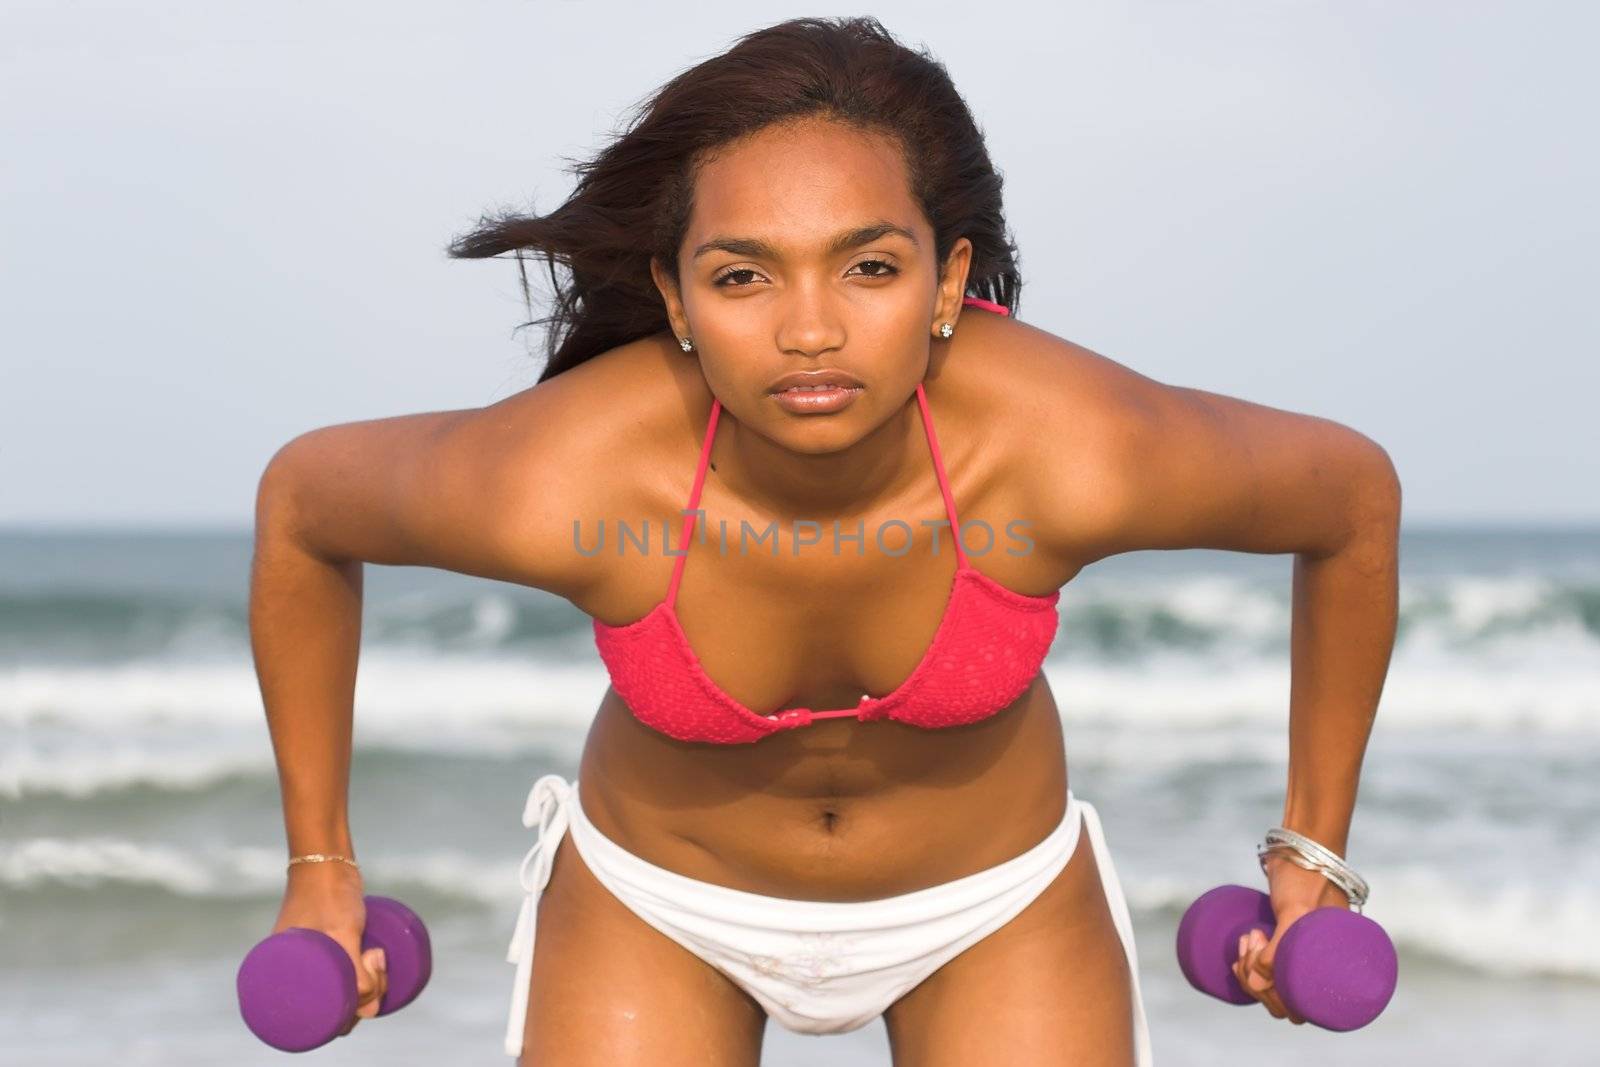 Ethnic Fitness model exercising with two dumbbells